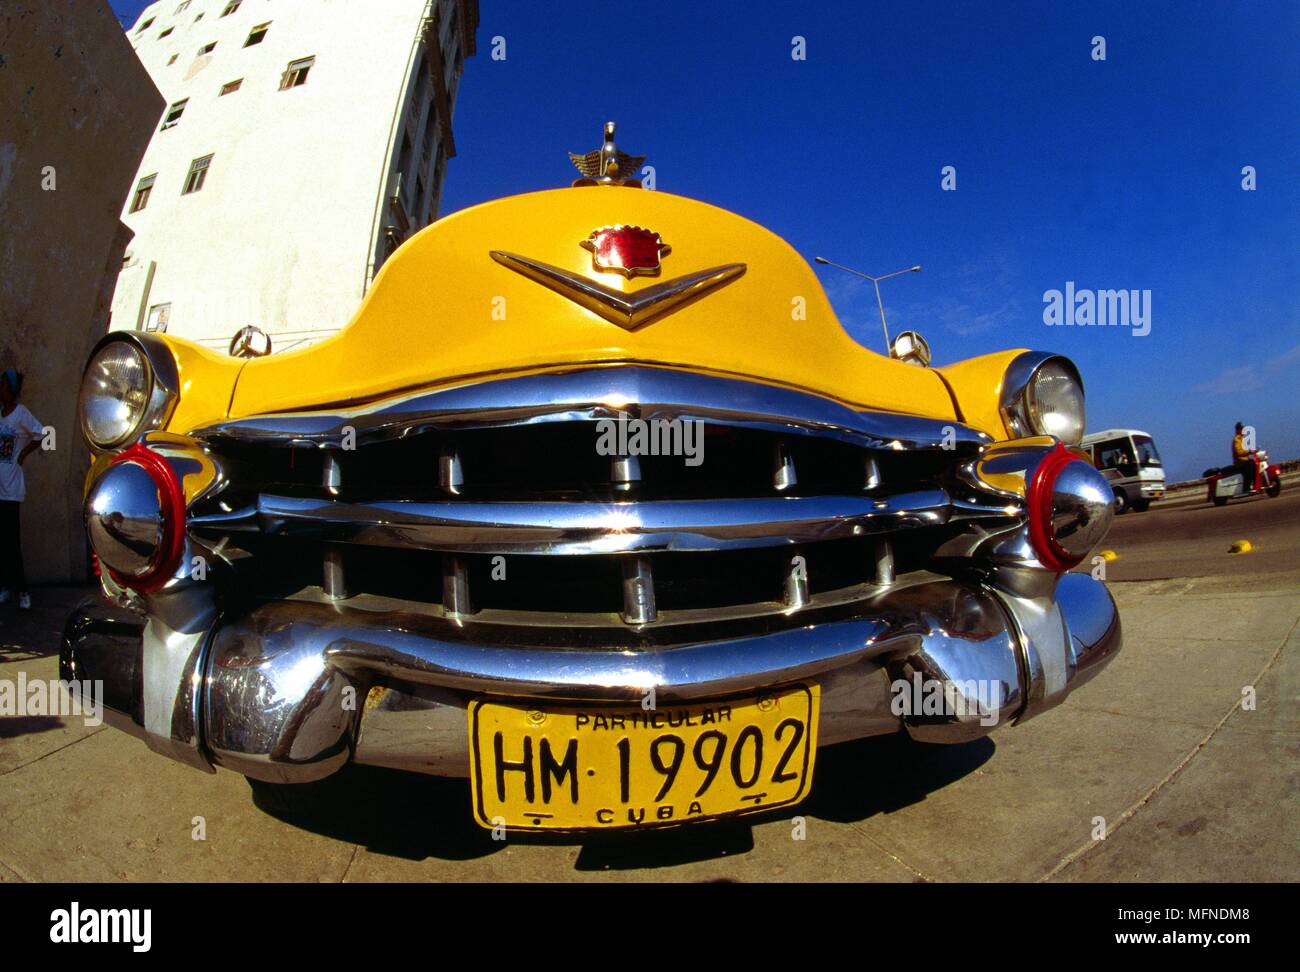 A 1952 Cadillac in the streets of La Havana.   Date:   Ref: B350 093521 0004  COMPULSORY CREDIT: Luis Quintanal Cabriale / Photoshot Stock Photo